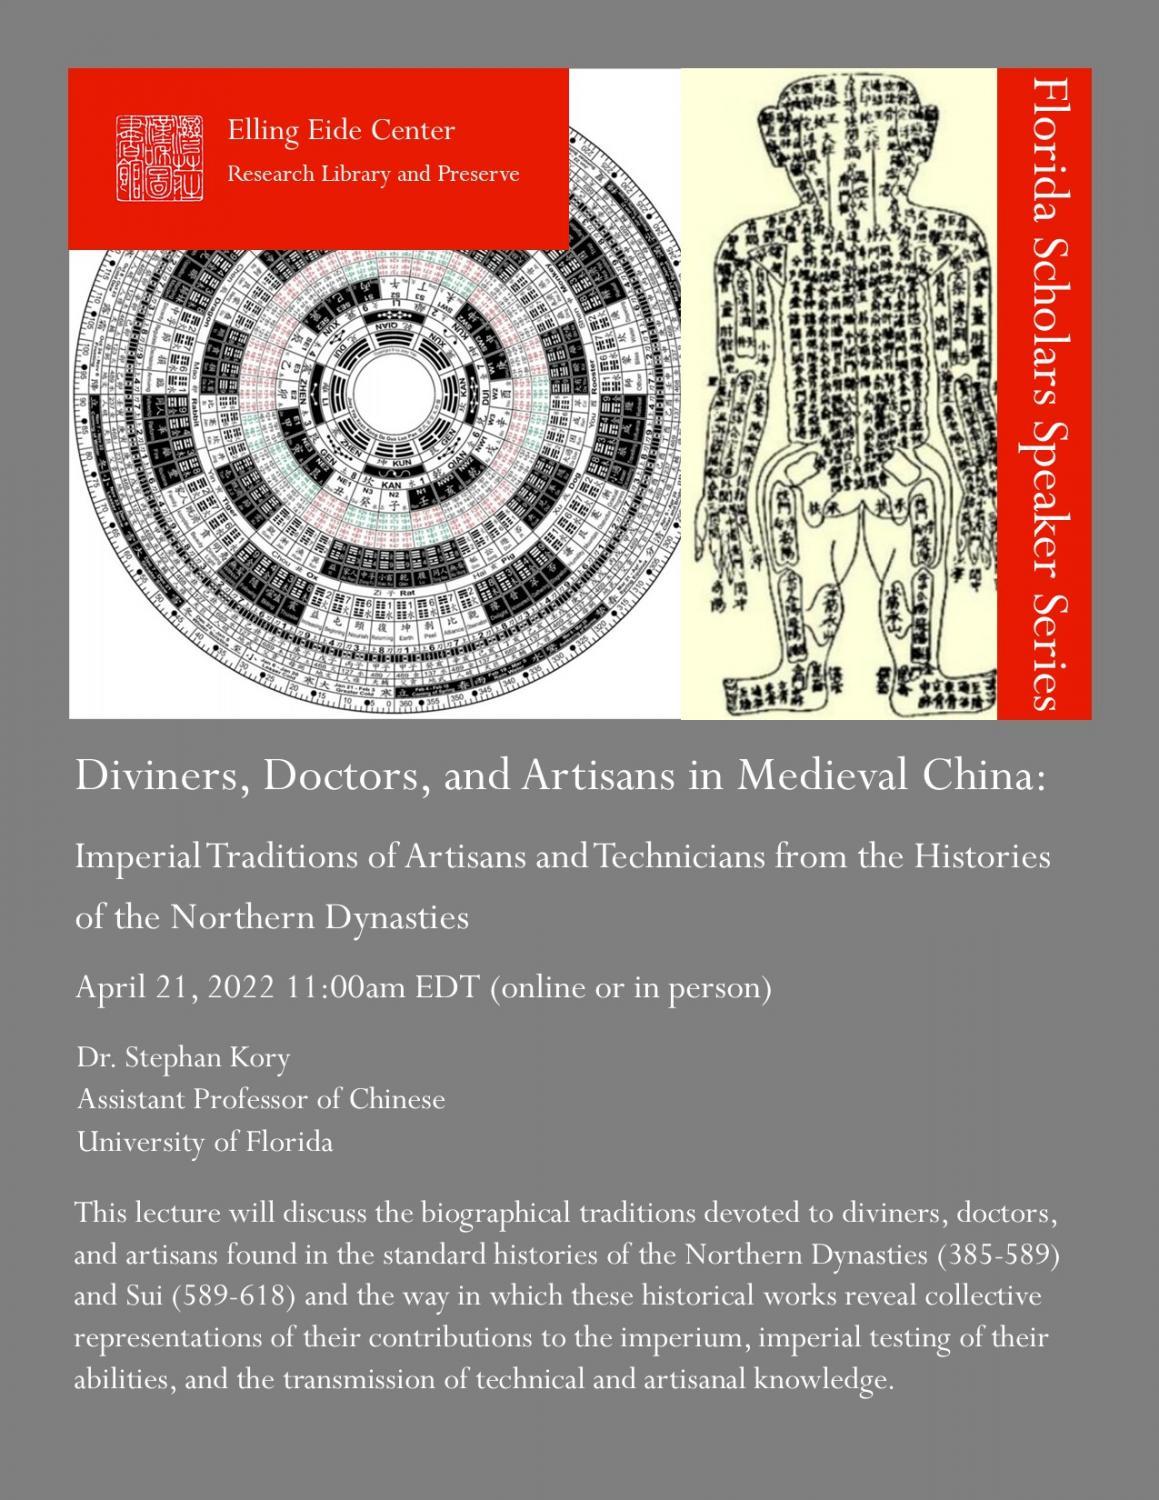 Diviners, Doctors, and Artisans in Medieval China